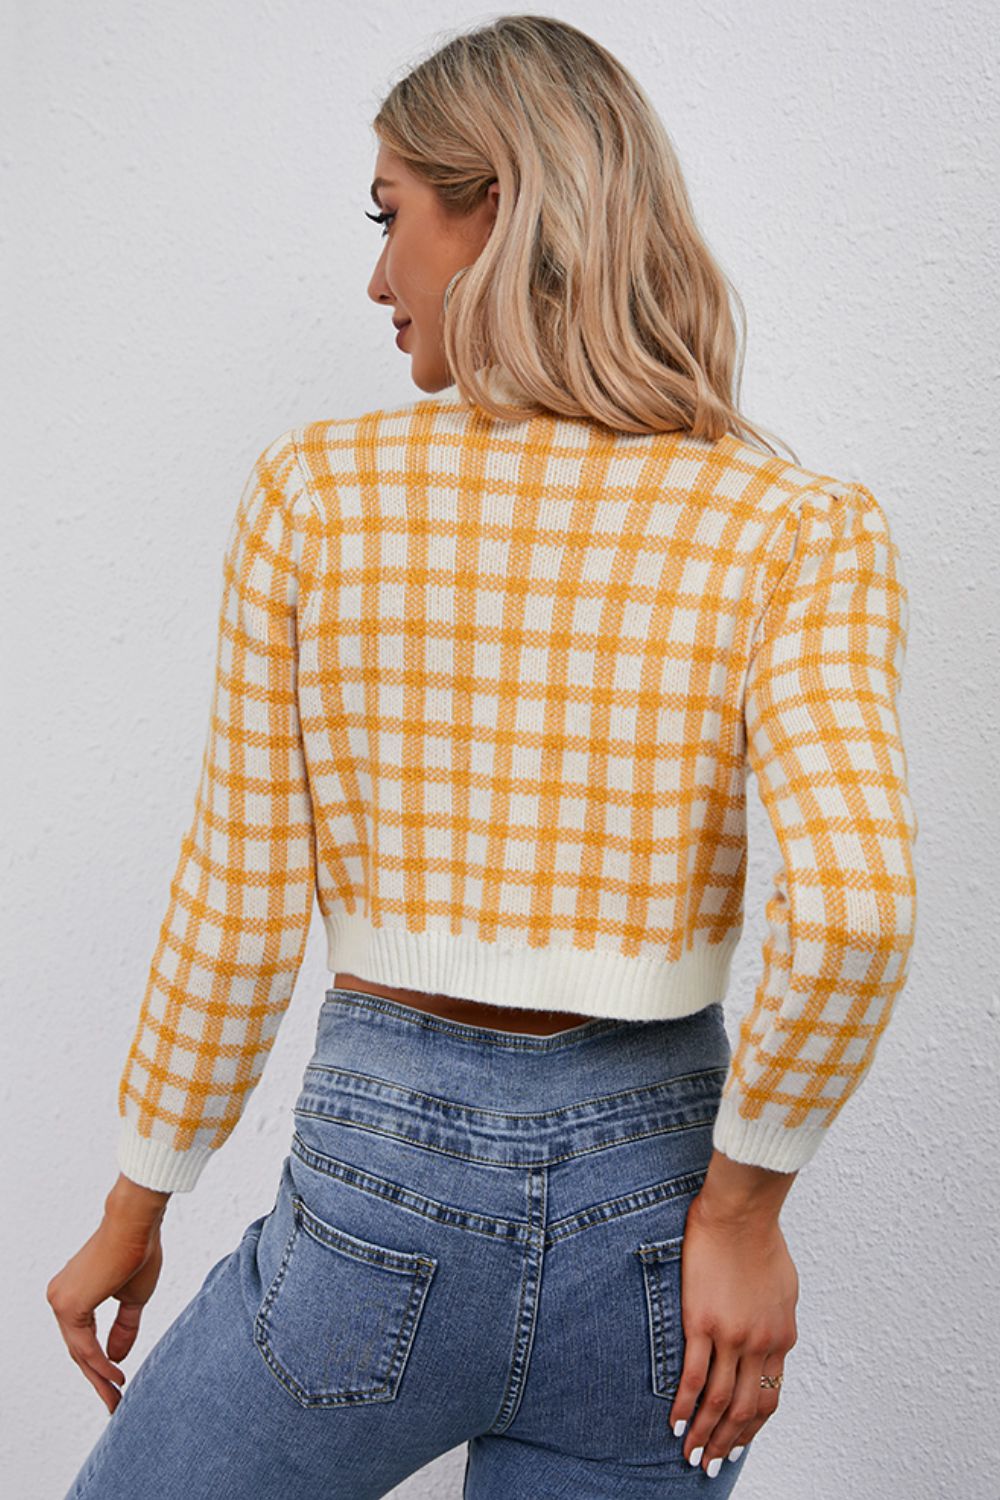 Plaid Buttoned Cropped Cardigan - Yellow / One Size - Women’s Clothing & Accessories - Shirts & Tops - 2 - 2024